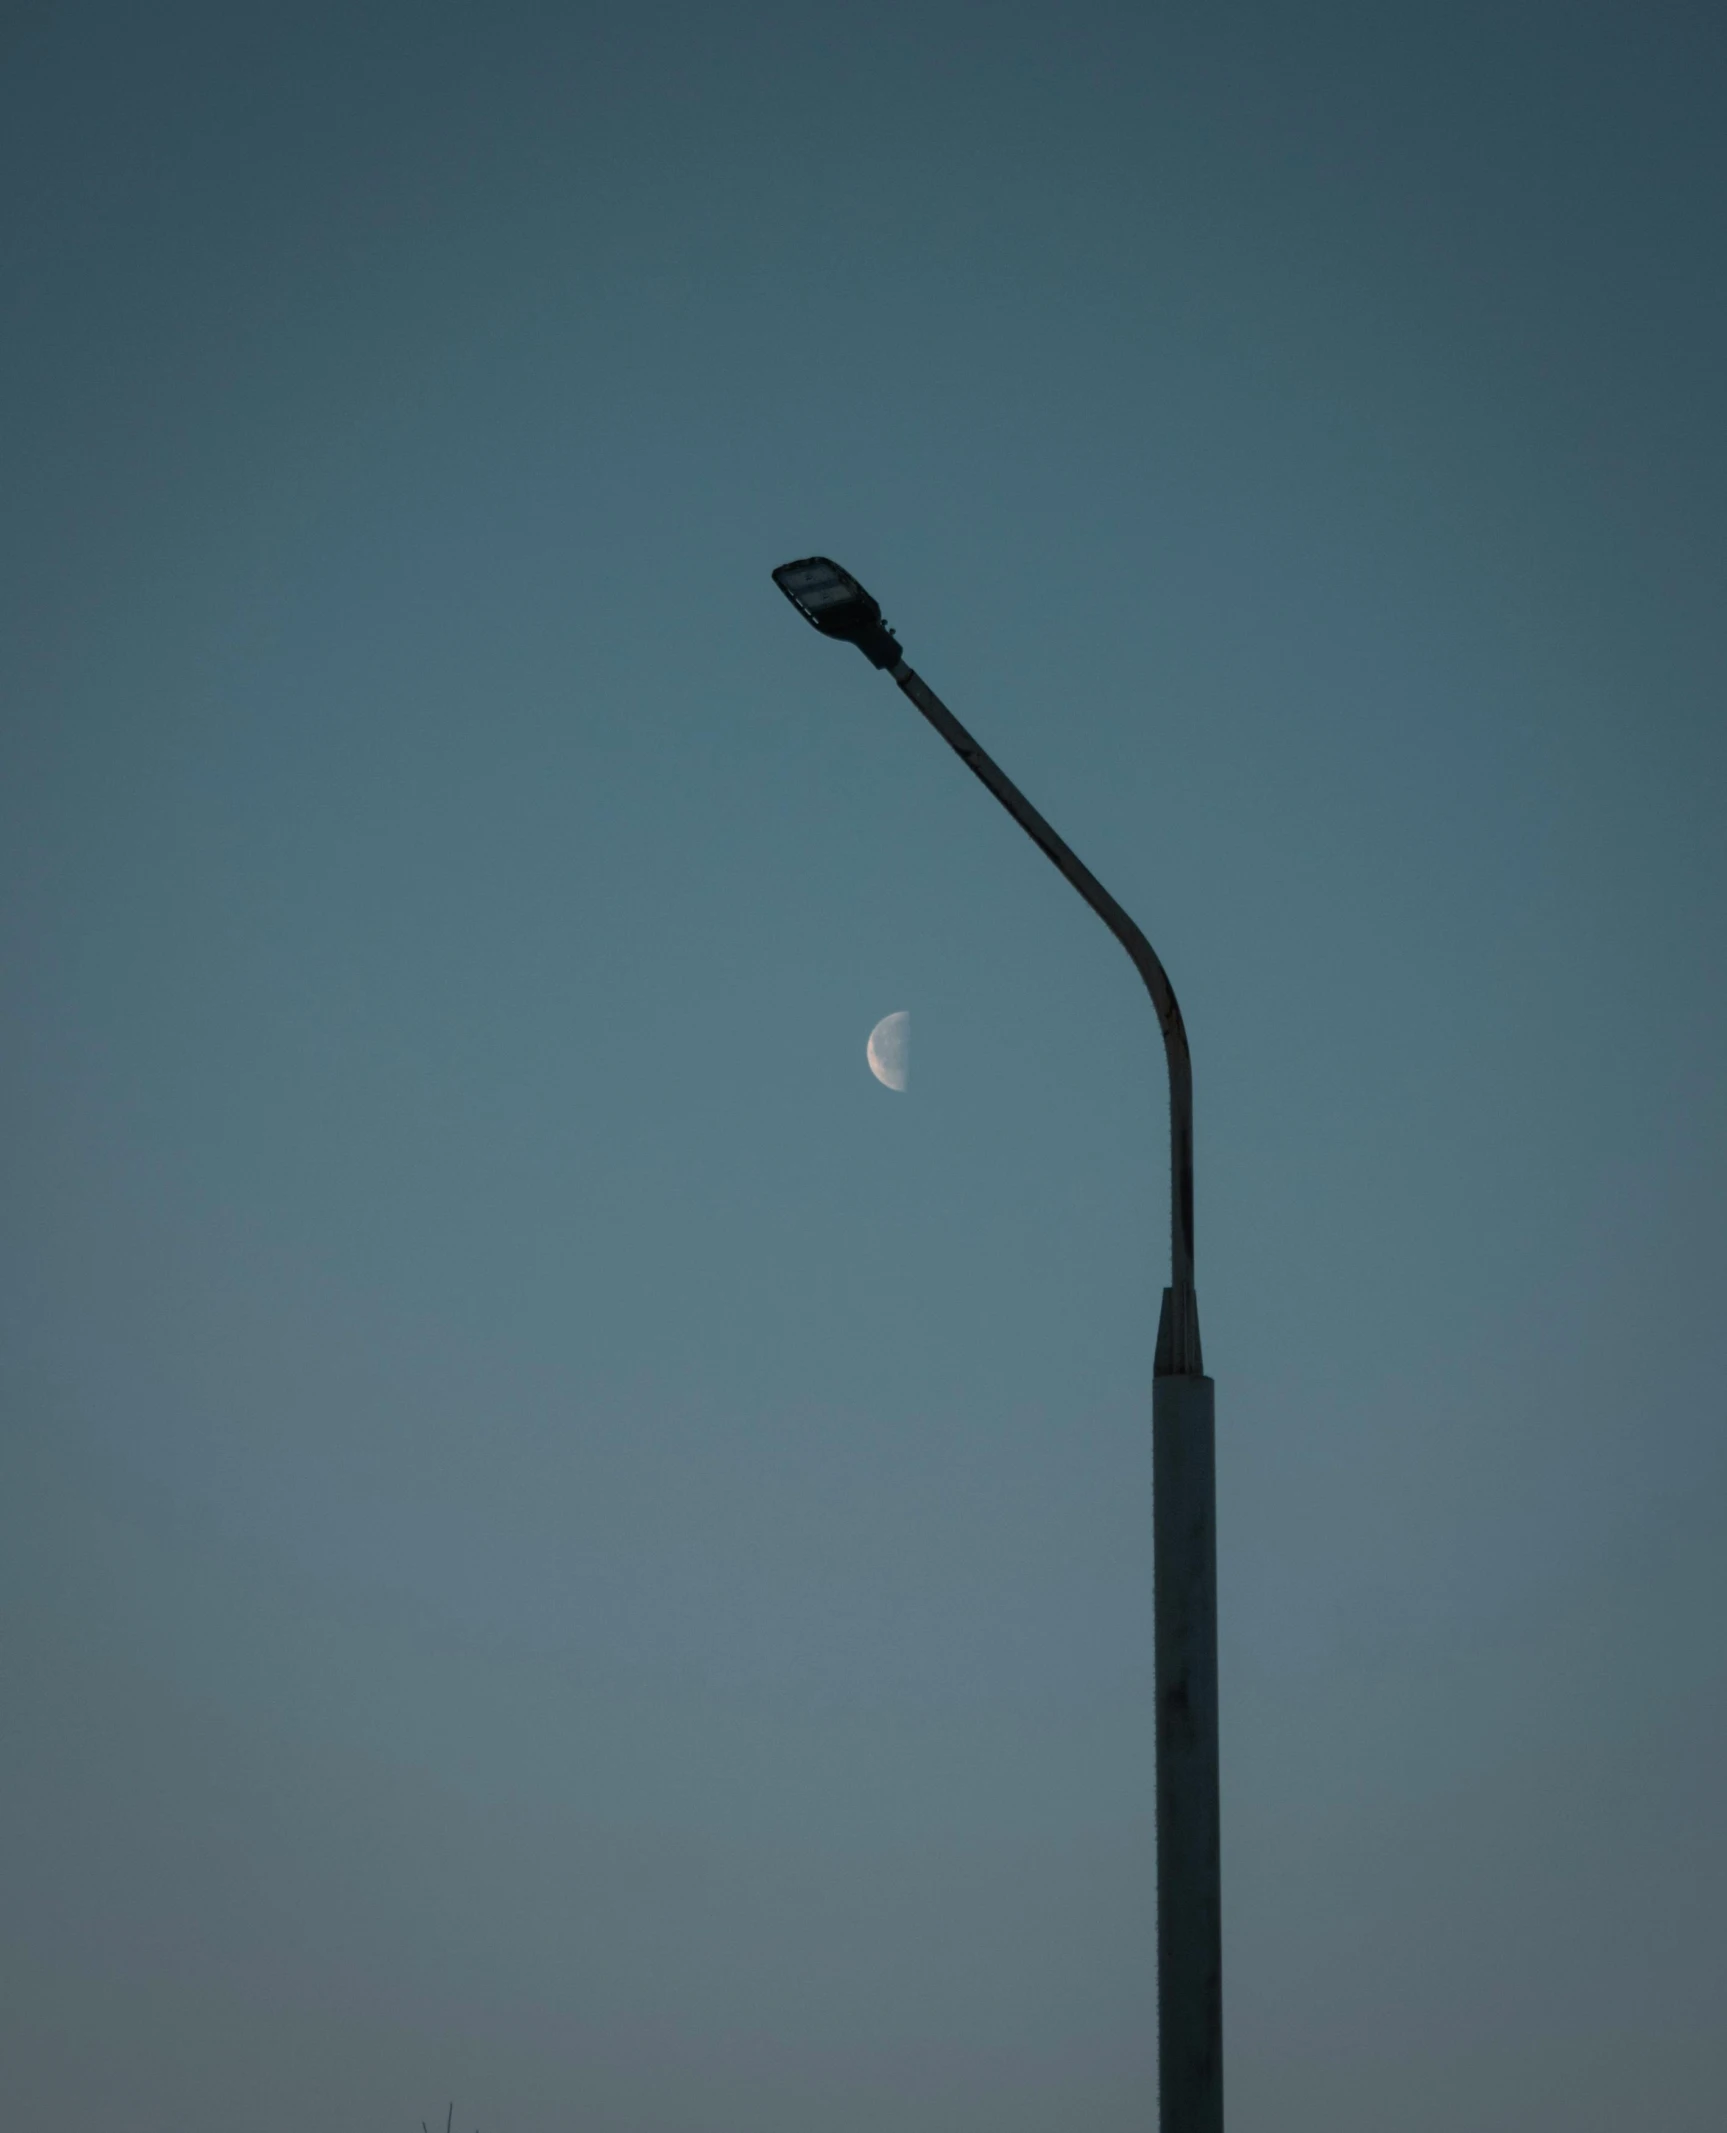 the moon is in the distant sky on this street lamp